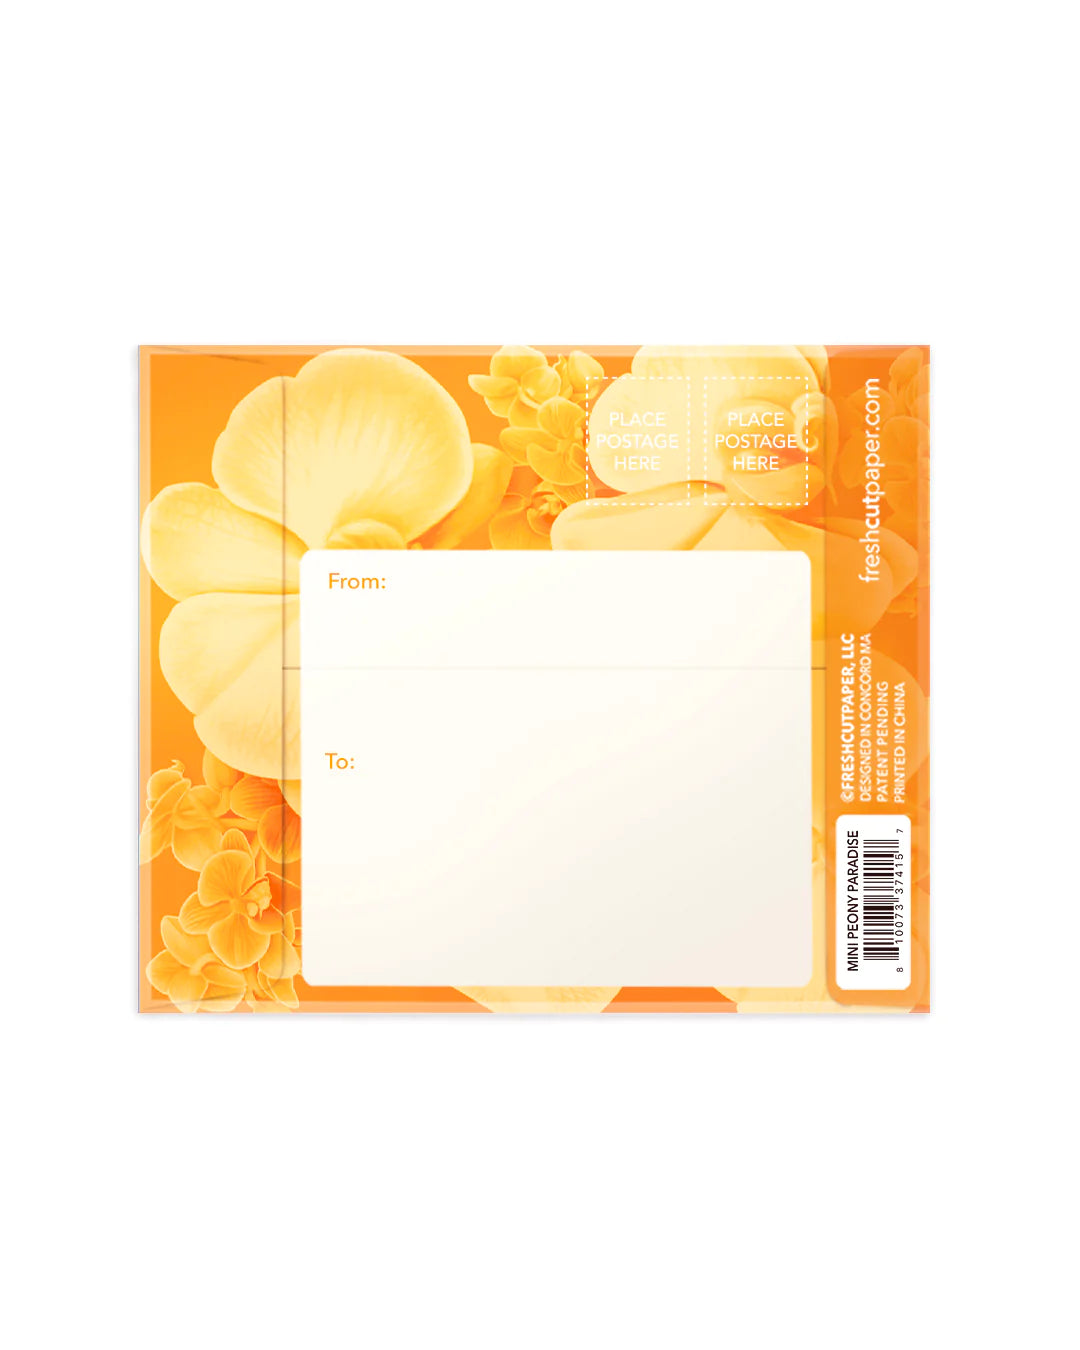 back view of yellow mailing envelope.